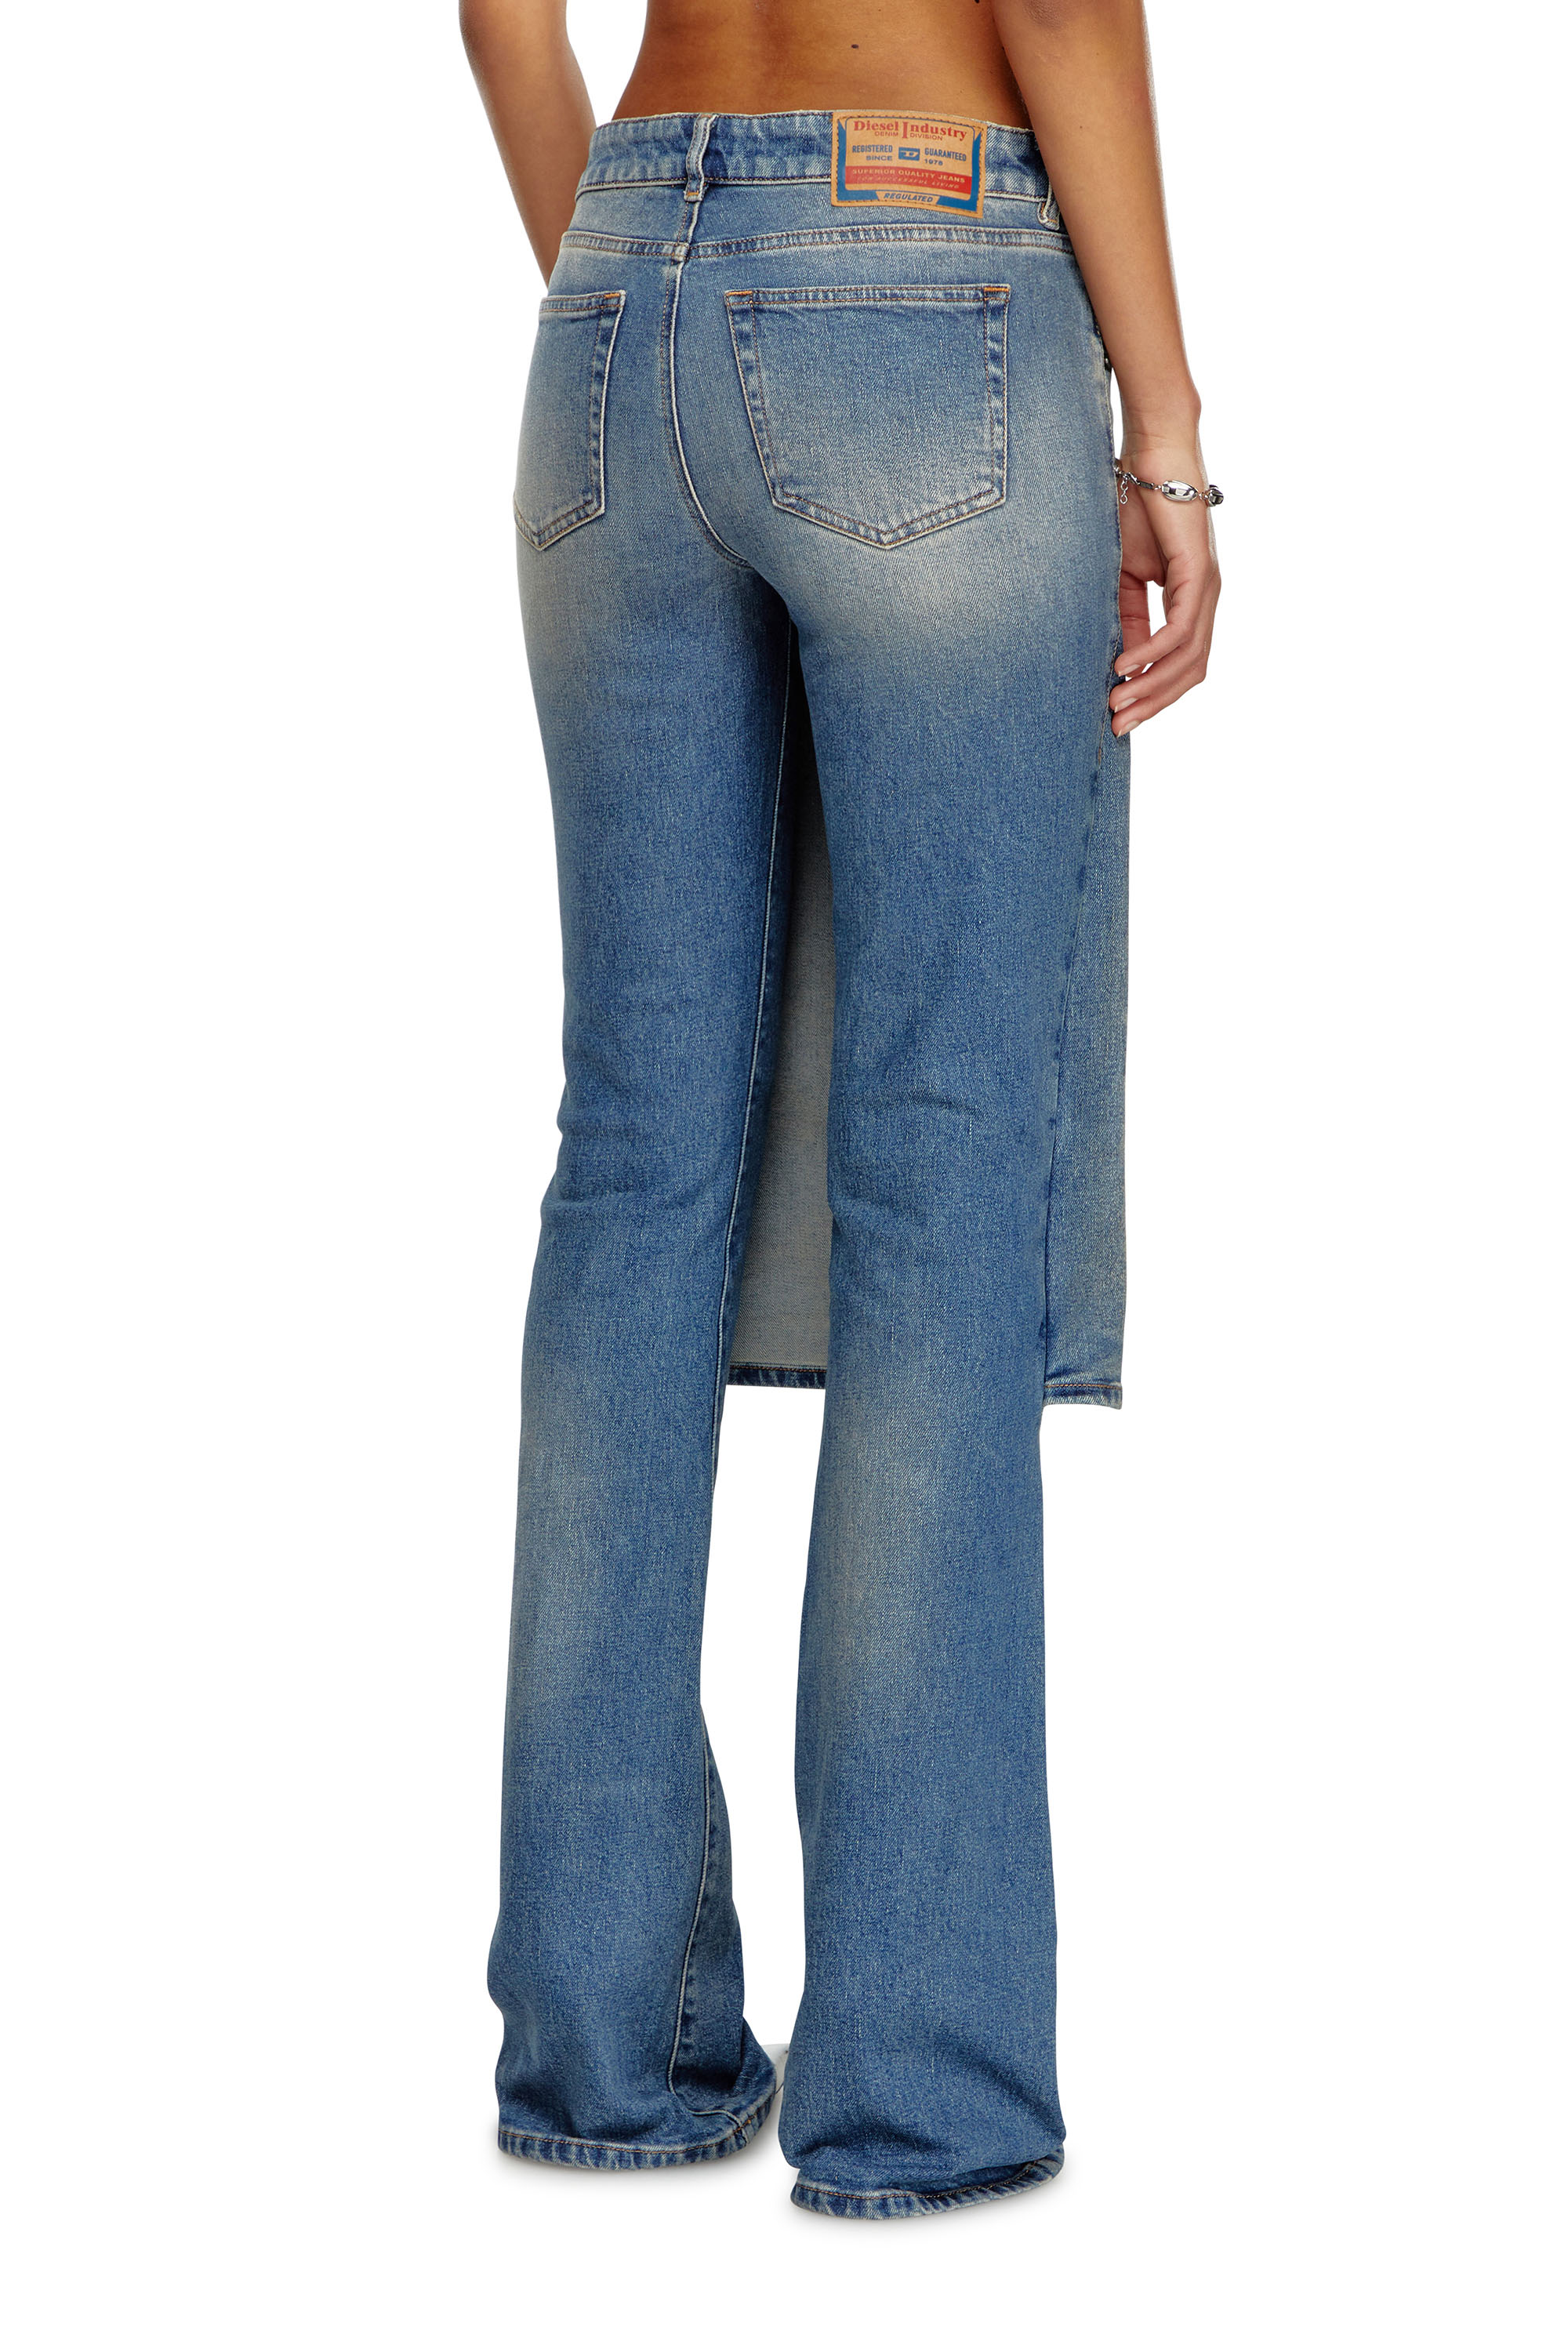 Diesel - Bootcut and Flare Jeans D-Sel 007X8, Mujer Bootcut y Flare Jeans - D-Sel in Azul marino - Image 4